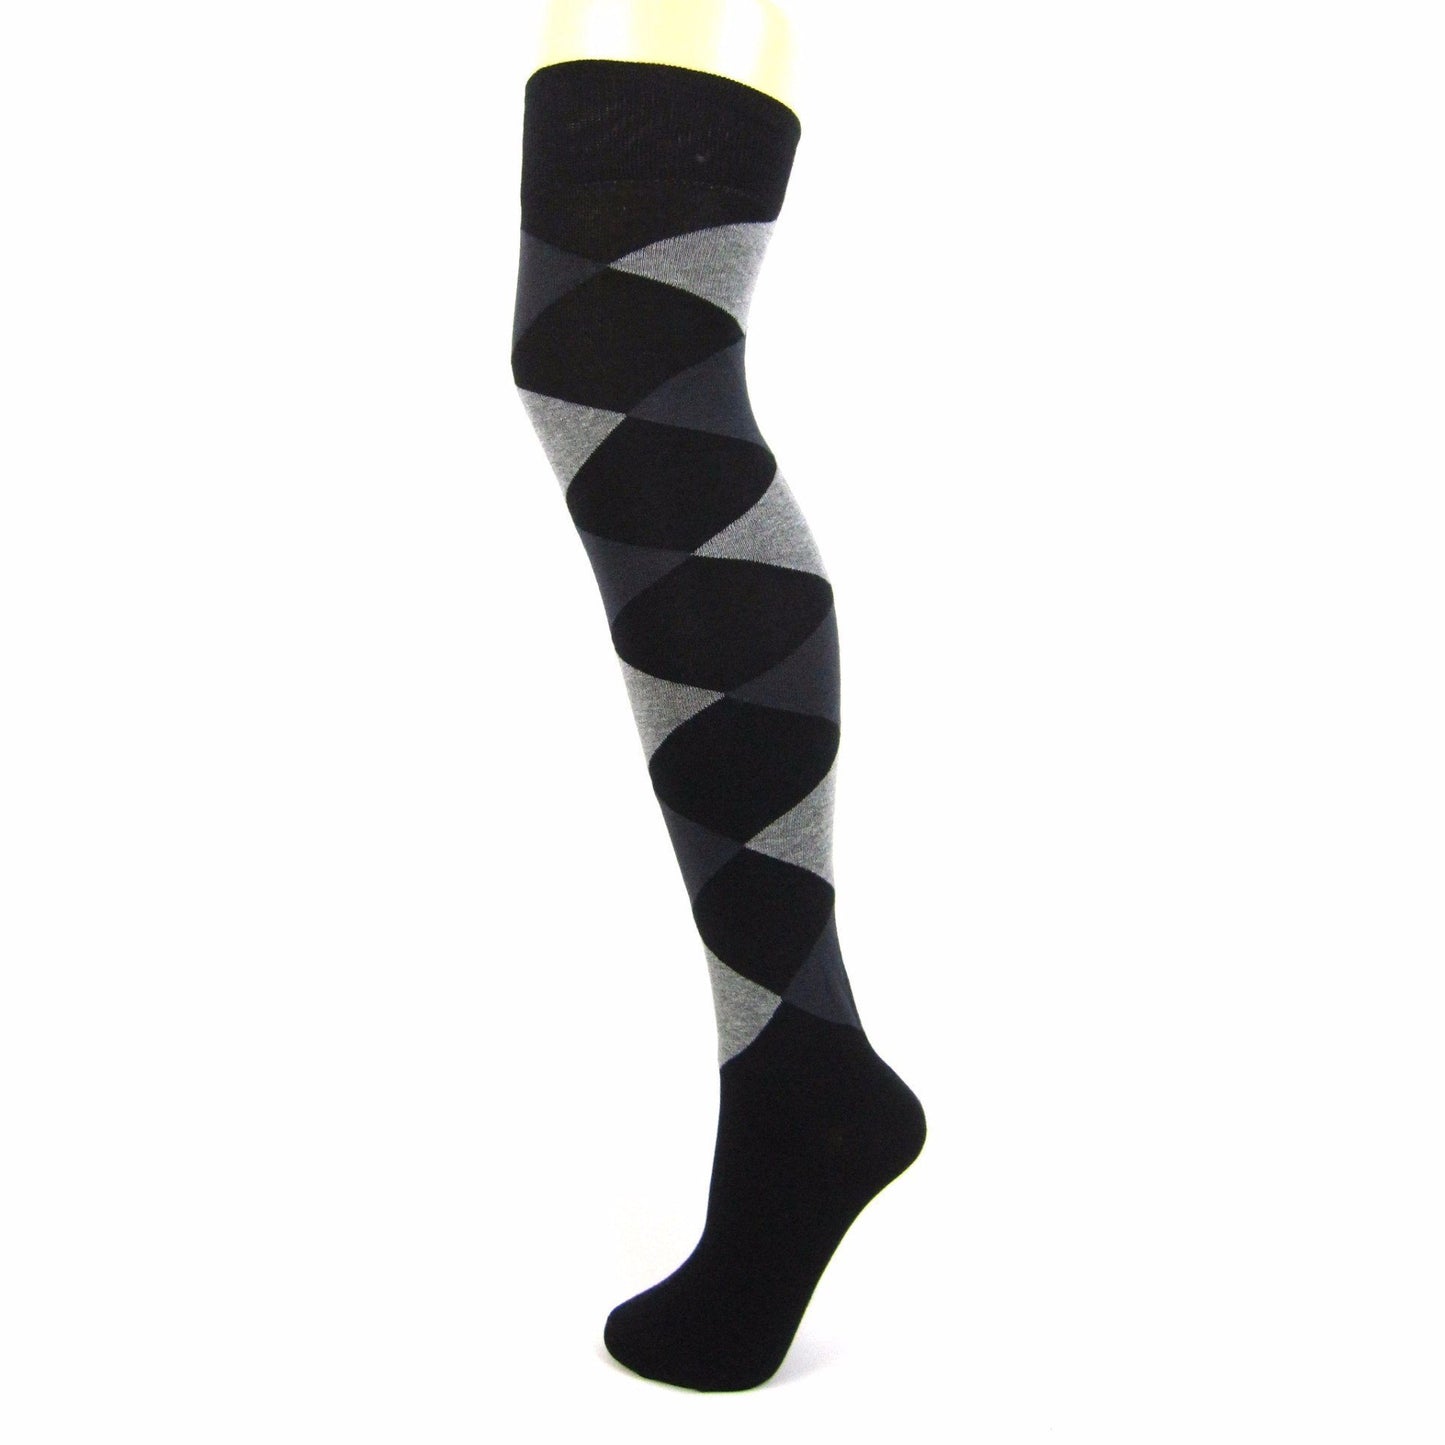 Load image into Gallery viewer, Cotton Blend Diamond Pattern Over The Knee Socks - Leggsbeautiful
